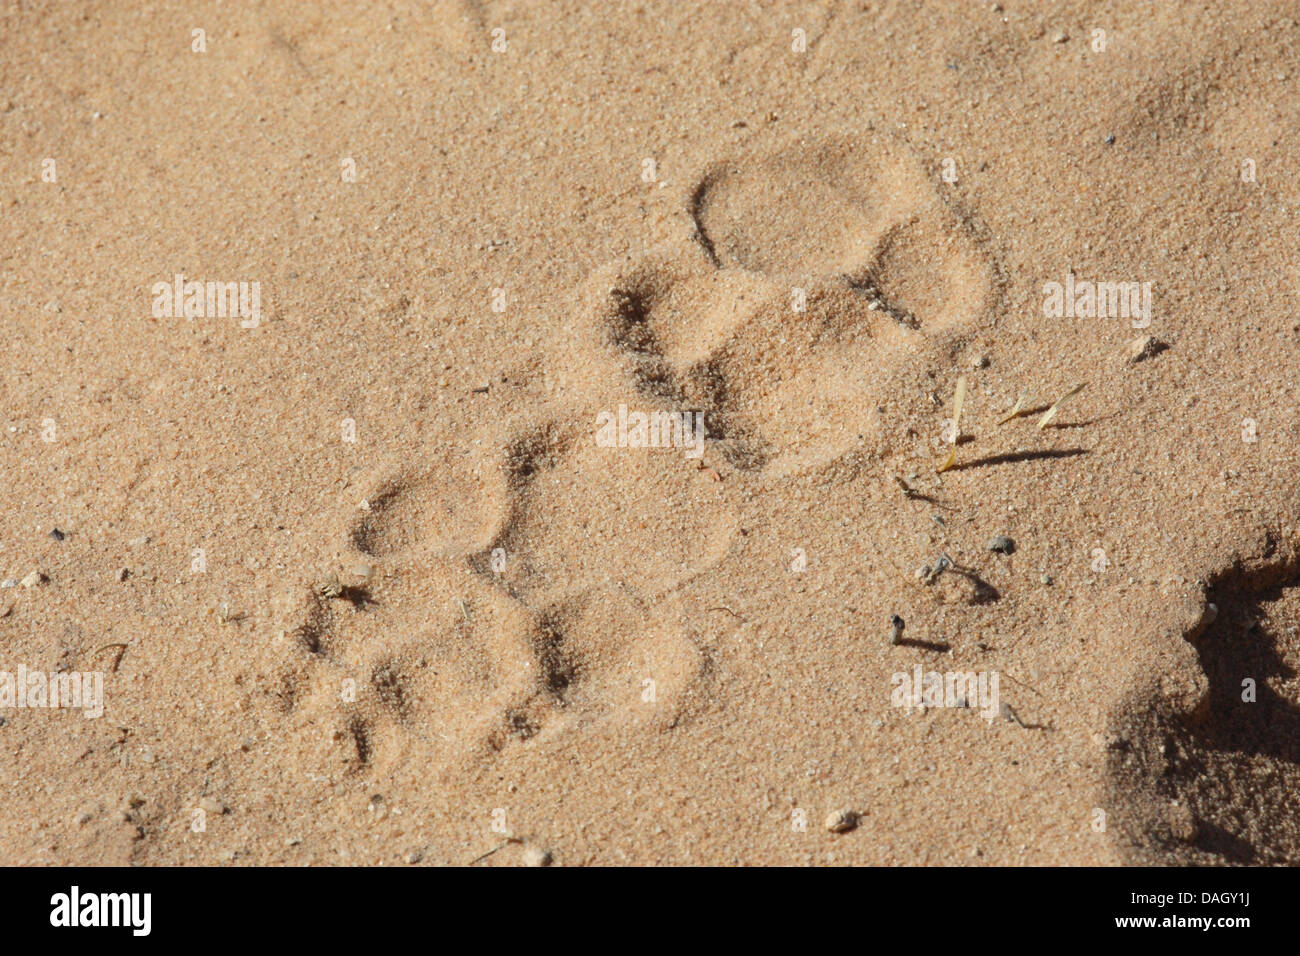 spotted hyena (Crocuta crocuta), paw prints in the sand, South Africa, Kgalagadi Transfrontier National Park Stock Photo